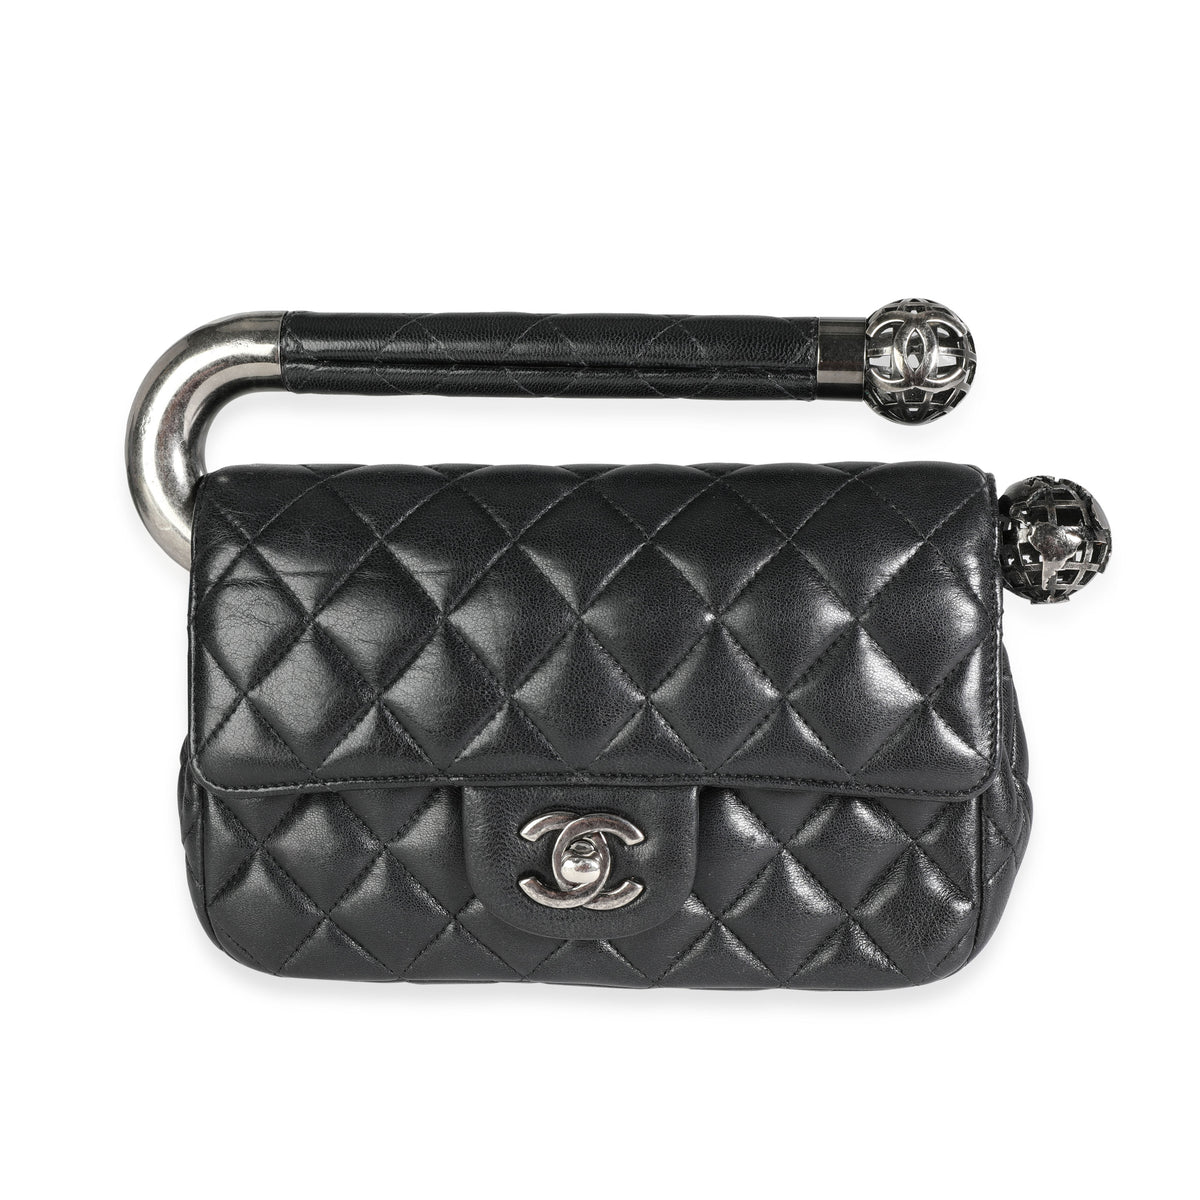 A BLACK QUILTED LEATHER SINGLE FLAP POUCH BAG, CHANEL, 2013